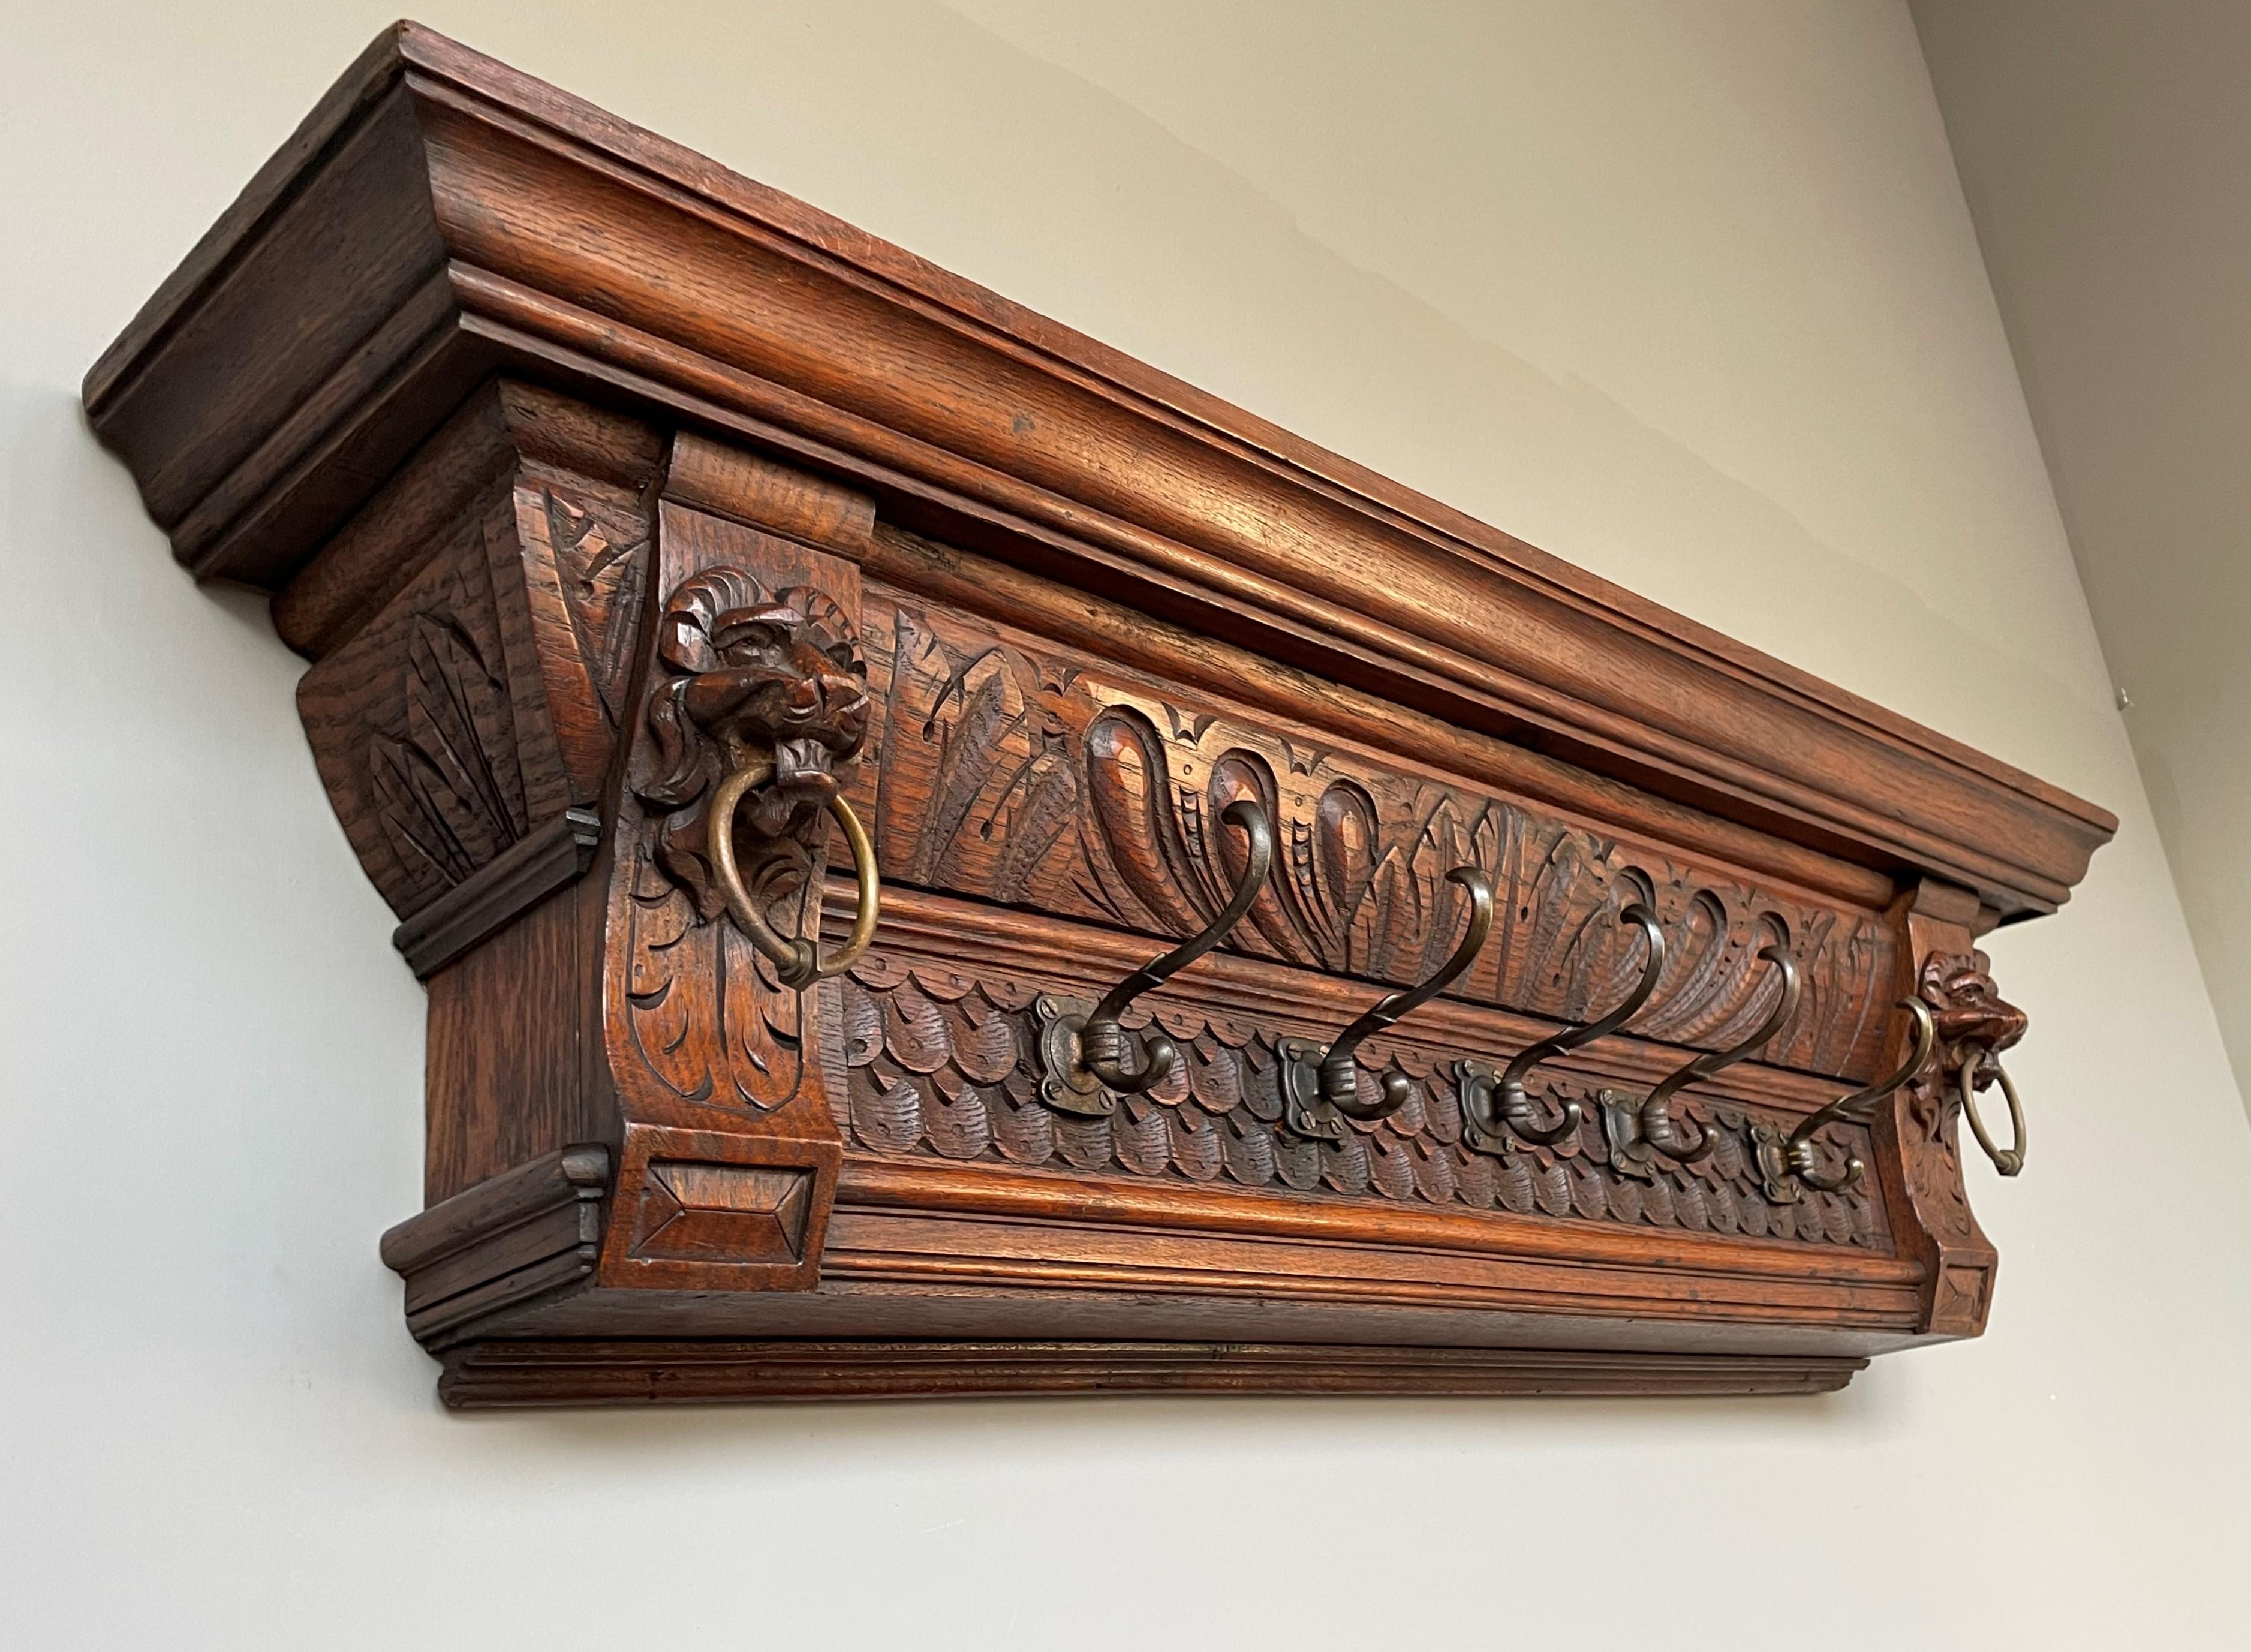 Unuasally deep and very sculptural coat rack with stylish bronzed hooks.

This antique and practical size Dutch coat rack is special and desirable for a number of reasons. First of all, it is very well carved and with great depth. Secondly, we